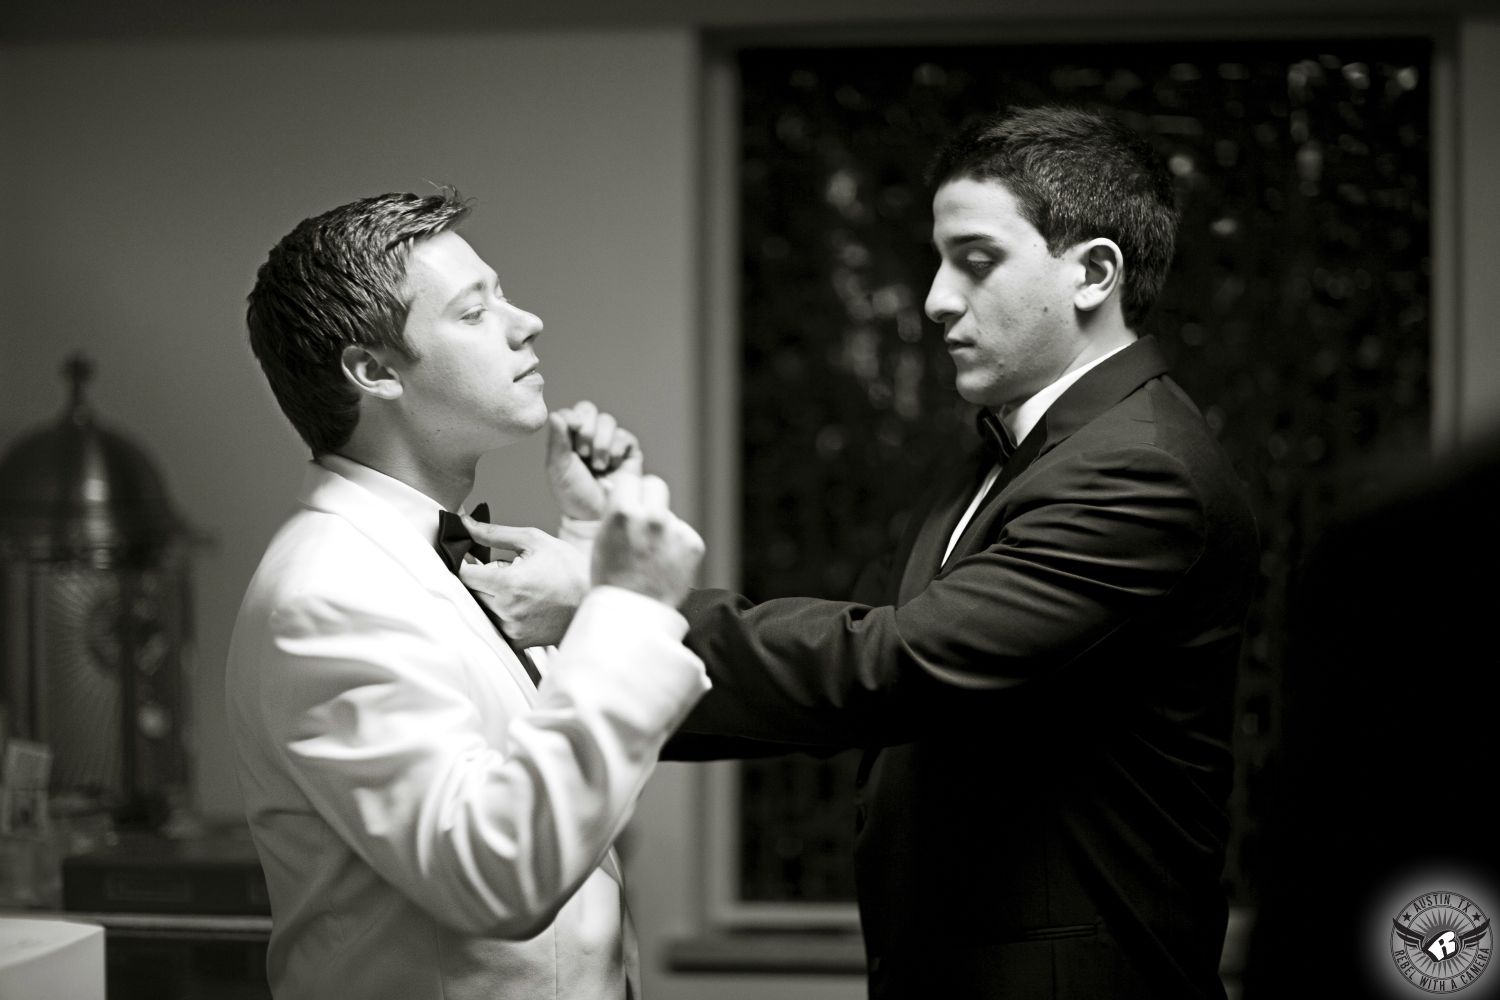 Best man in black tuxedo helps adjust the black bowtie of the groom in a classic white tuxedo jacket the at St. Austin's before the Catholic wedding ceremony.  